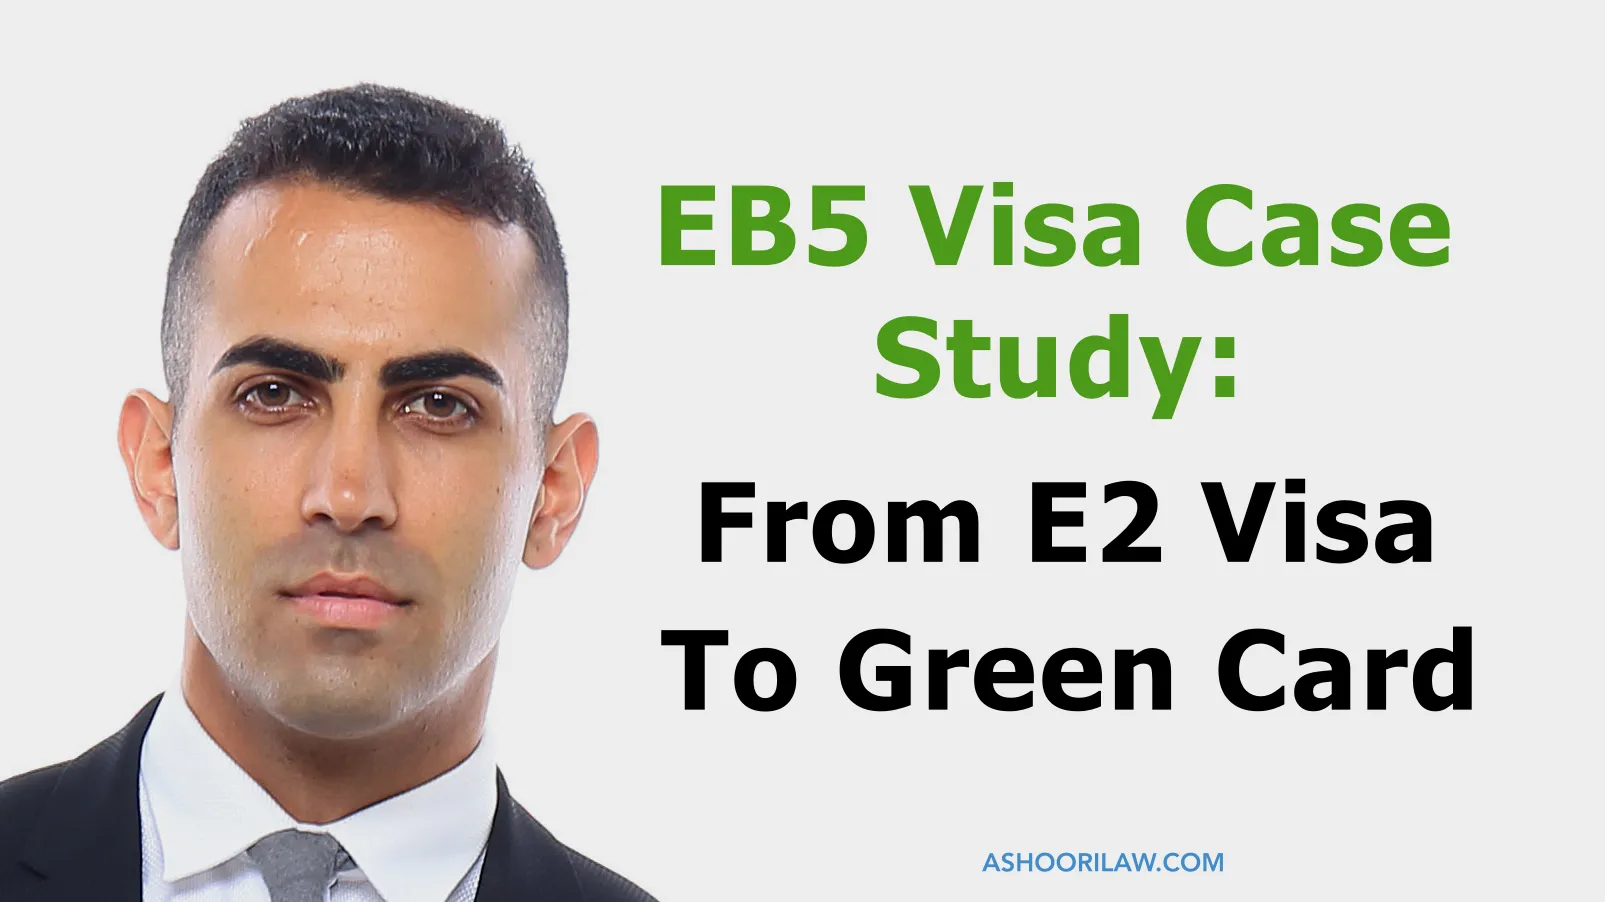 EB5 Visa Case Study - From E2 Visa To Green Card